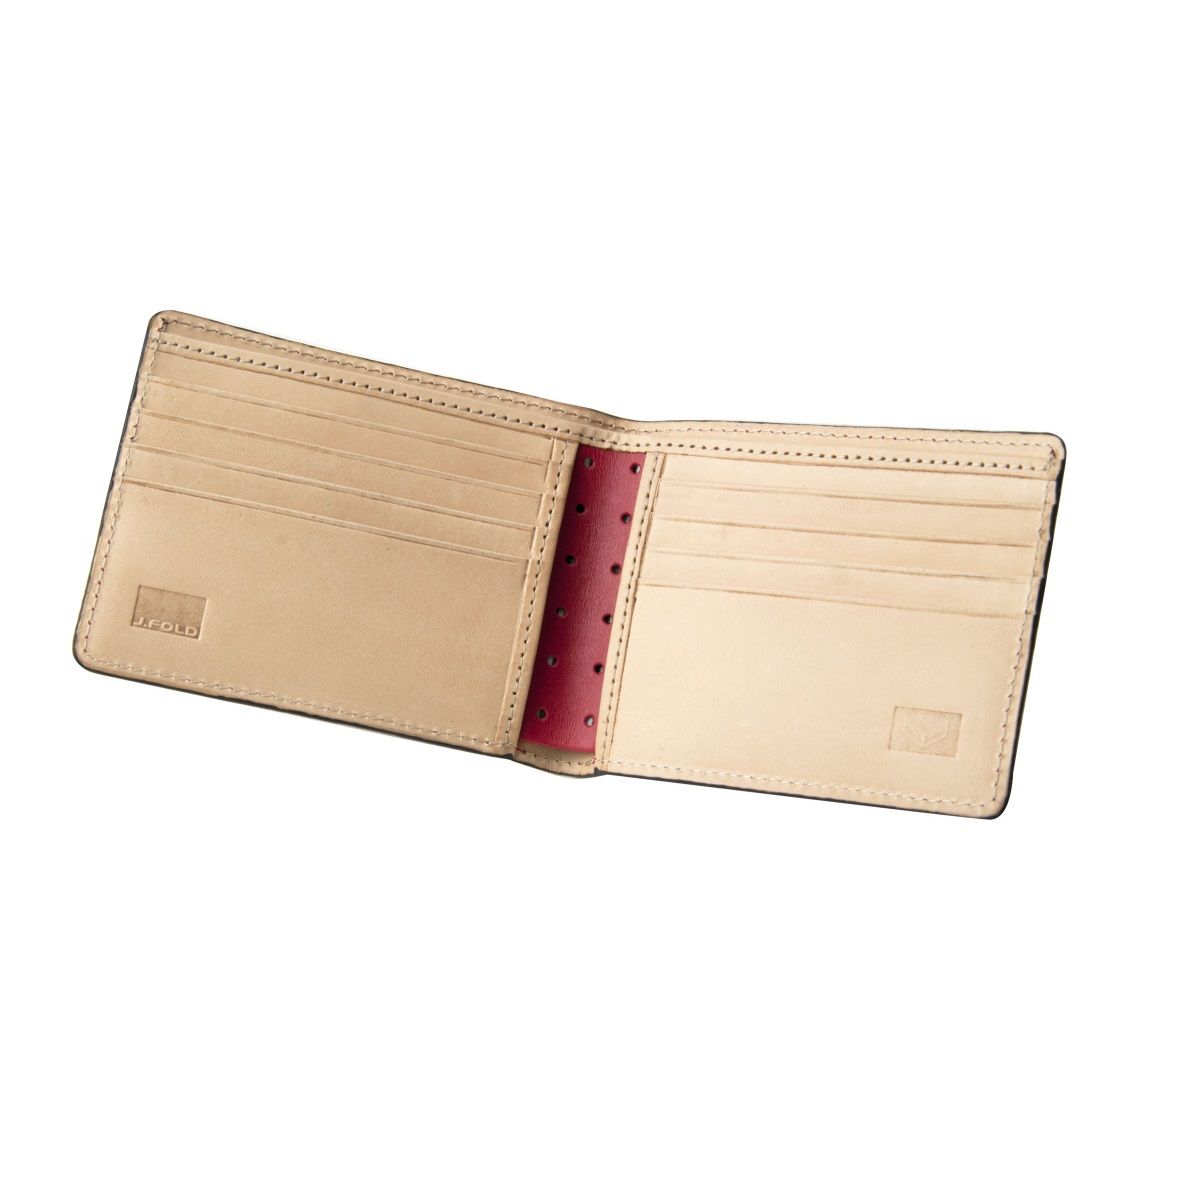 J.FOLD Thunderbird Leather Wallet - Red